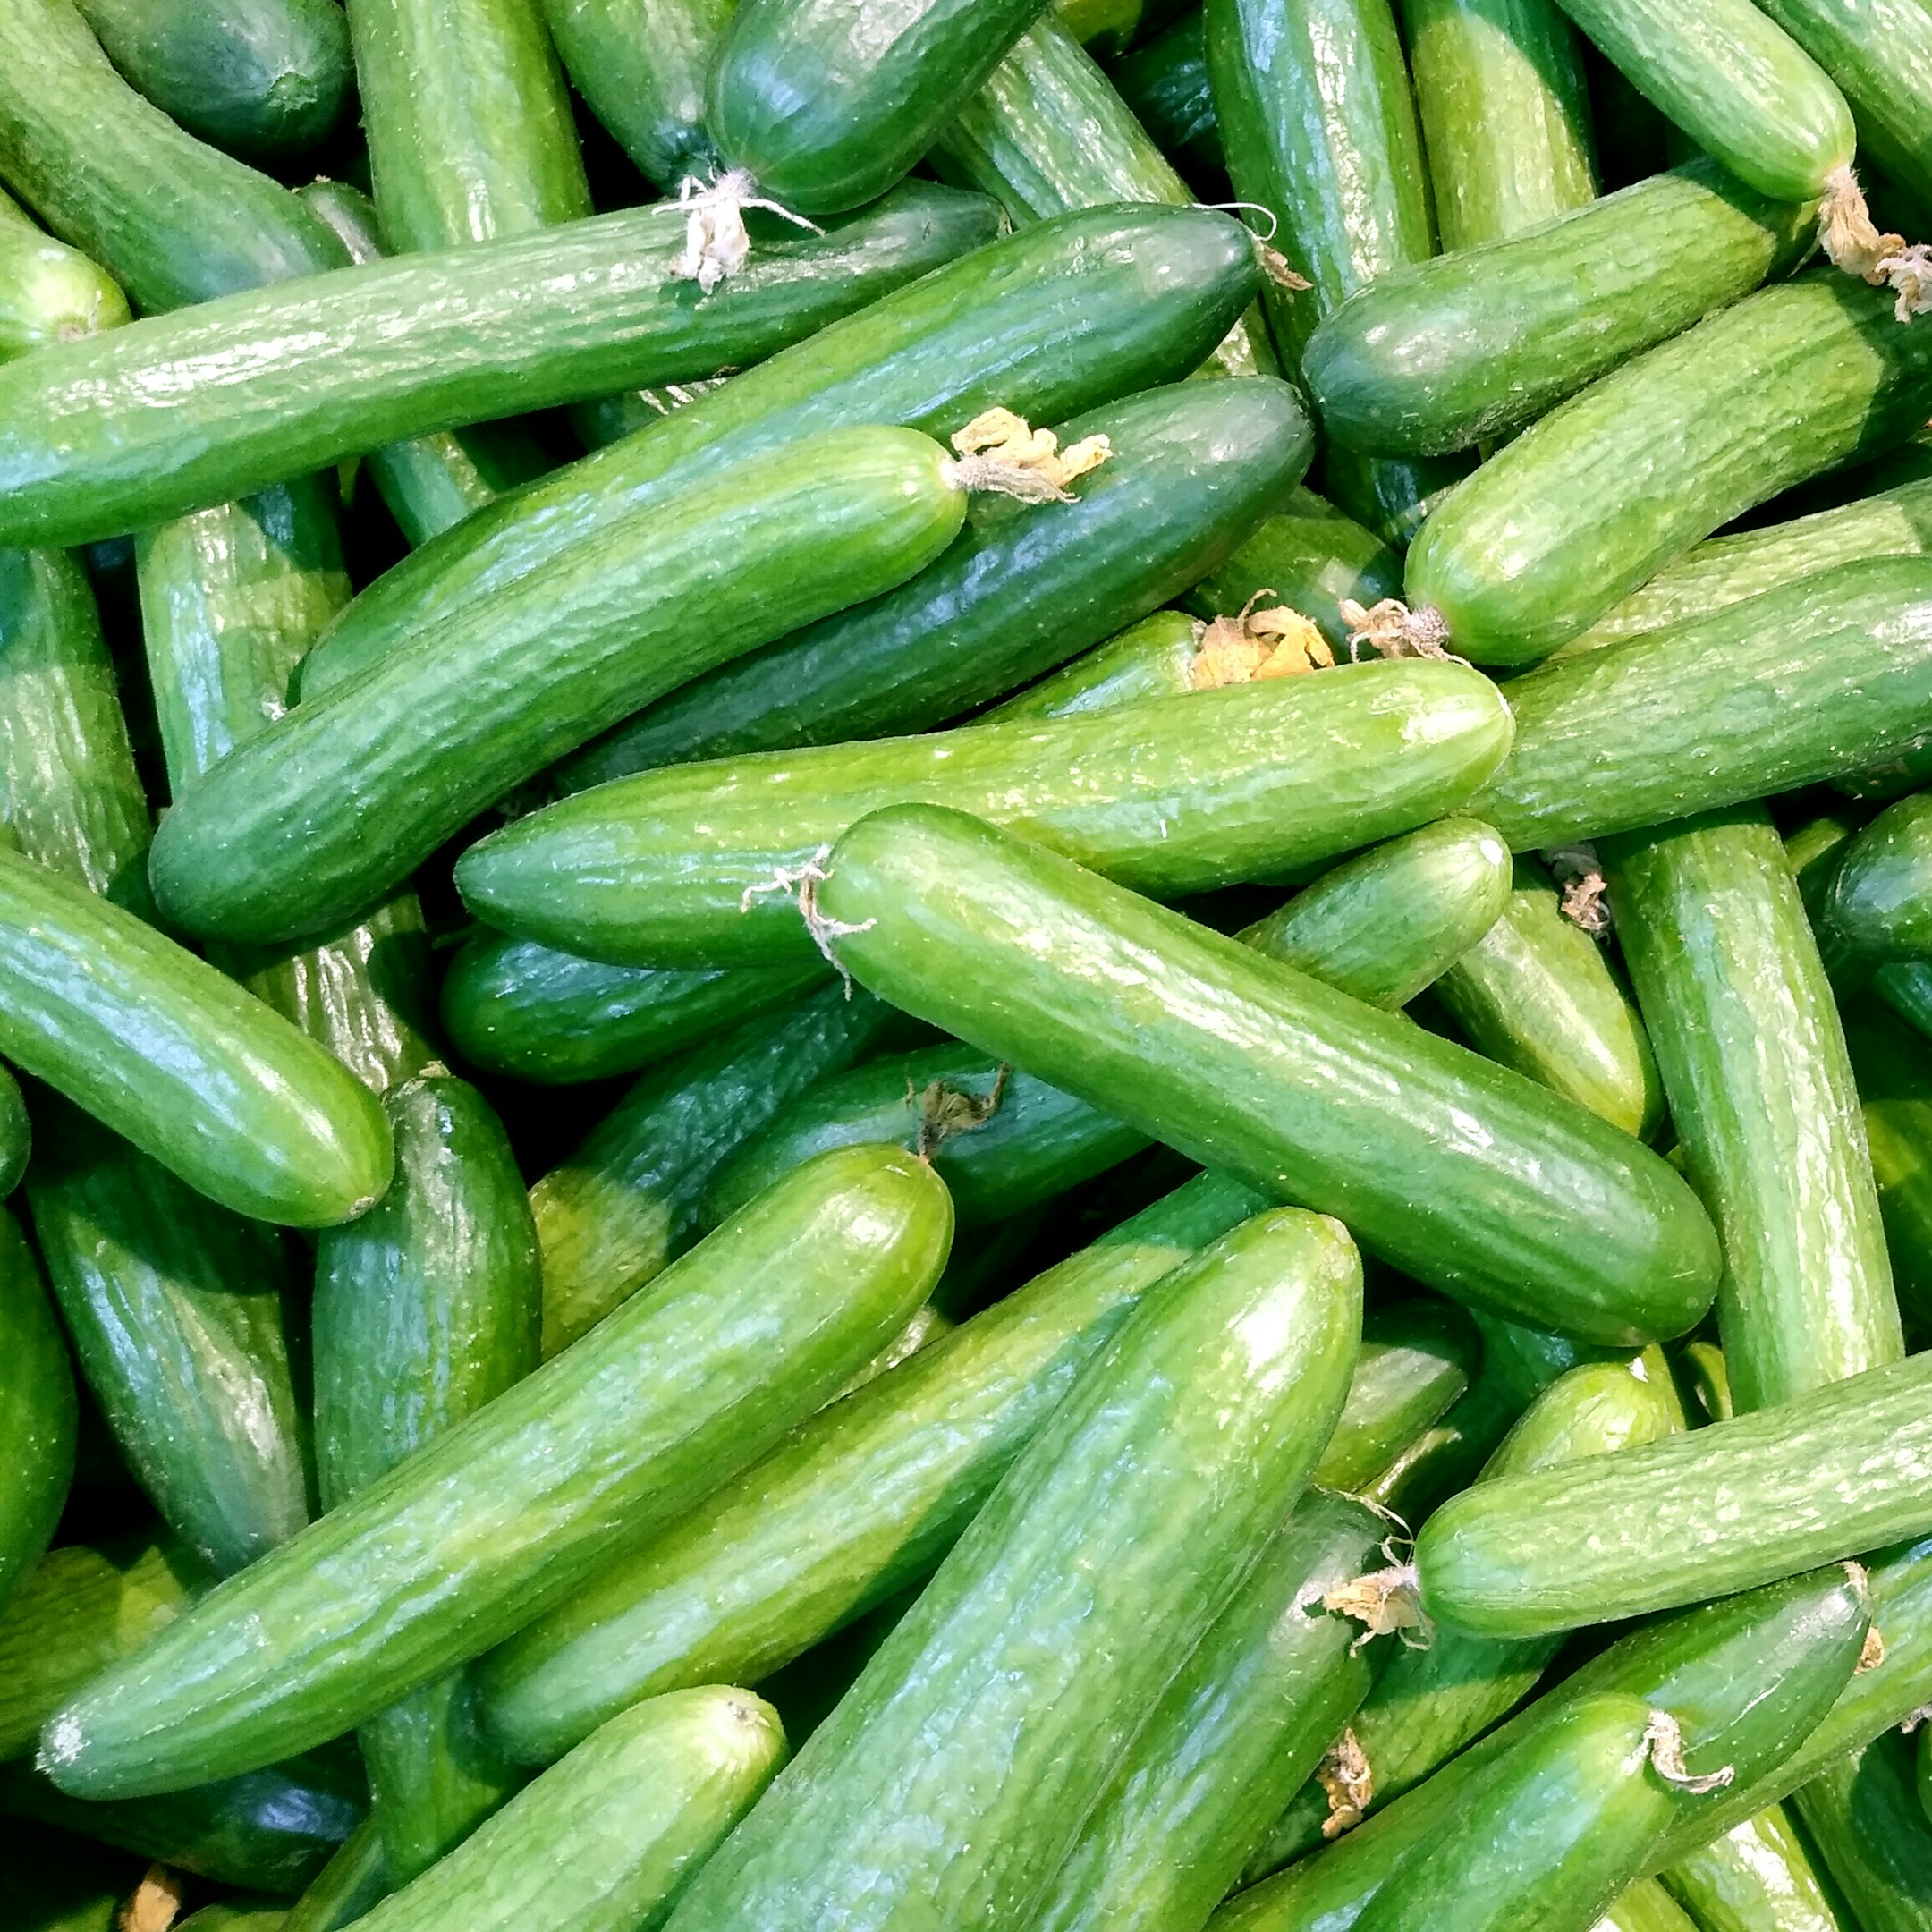 https://hindi.krishijagran.com/ampstories/easy-trick-to-identify-bitter-and-sweet-cucumber-while-buying.html